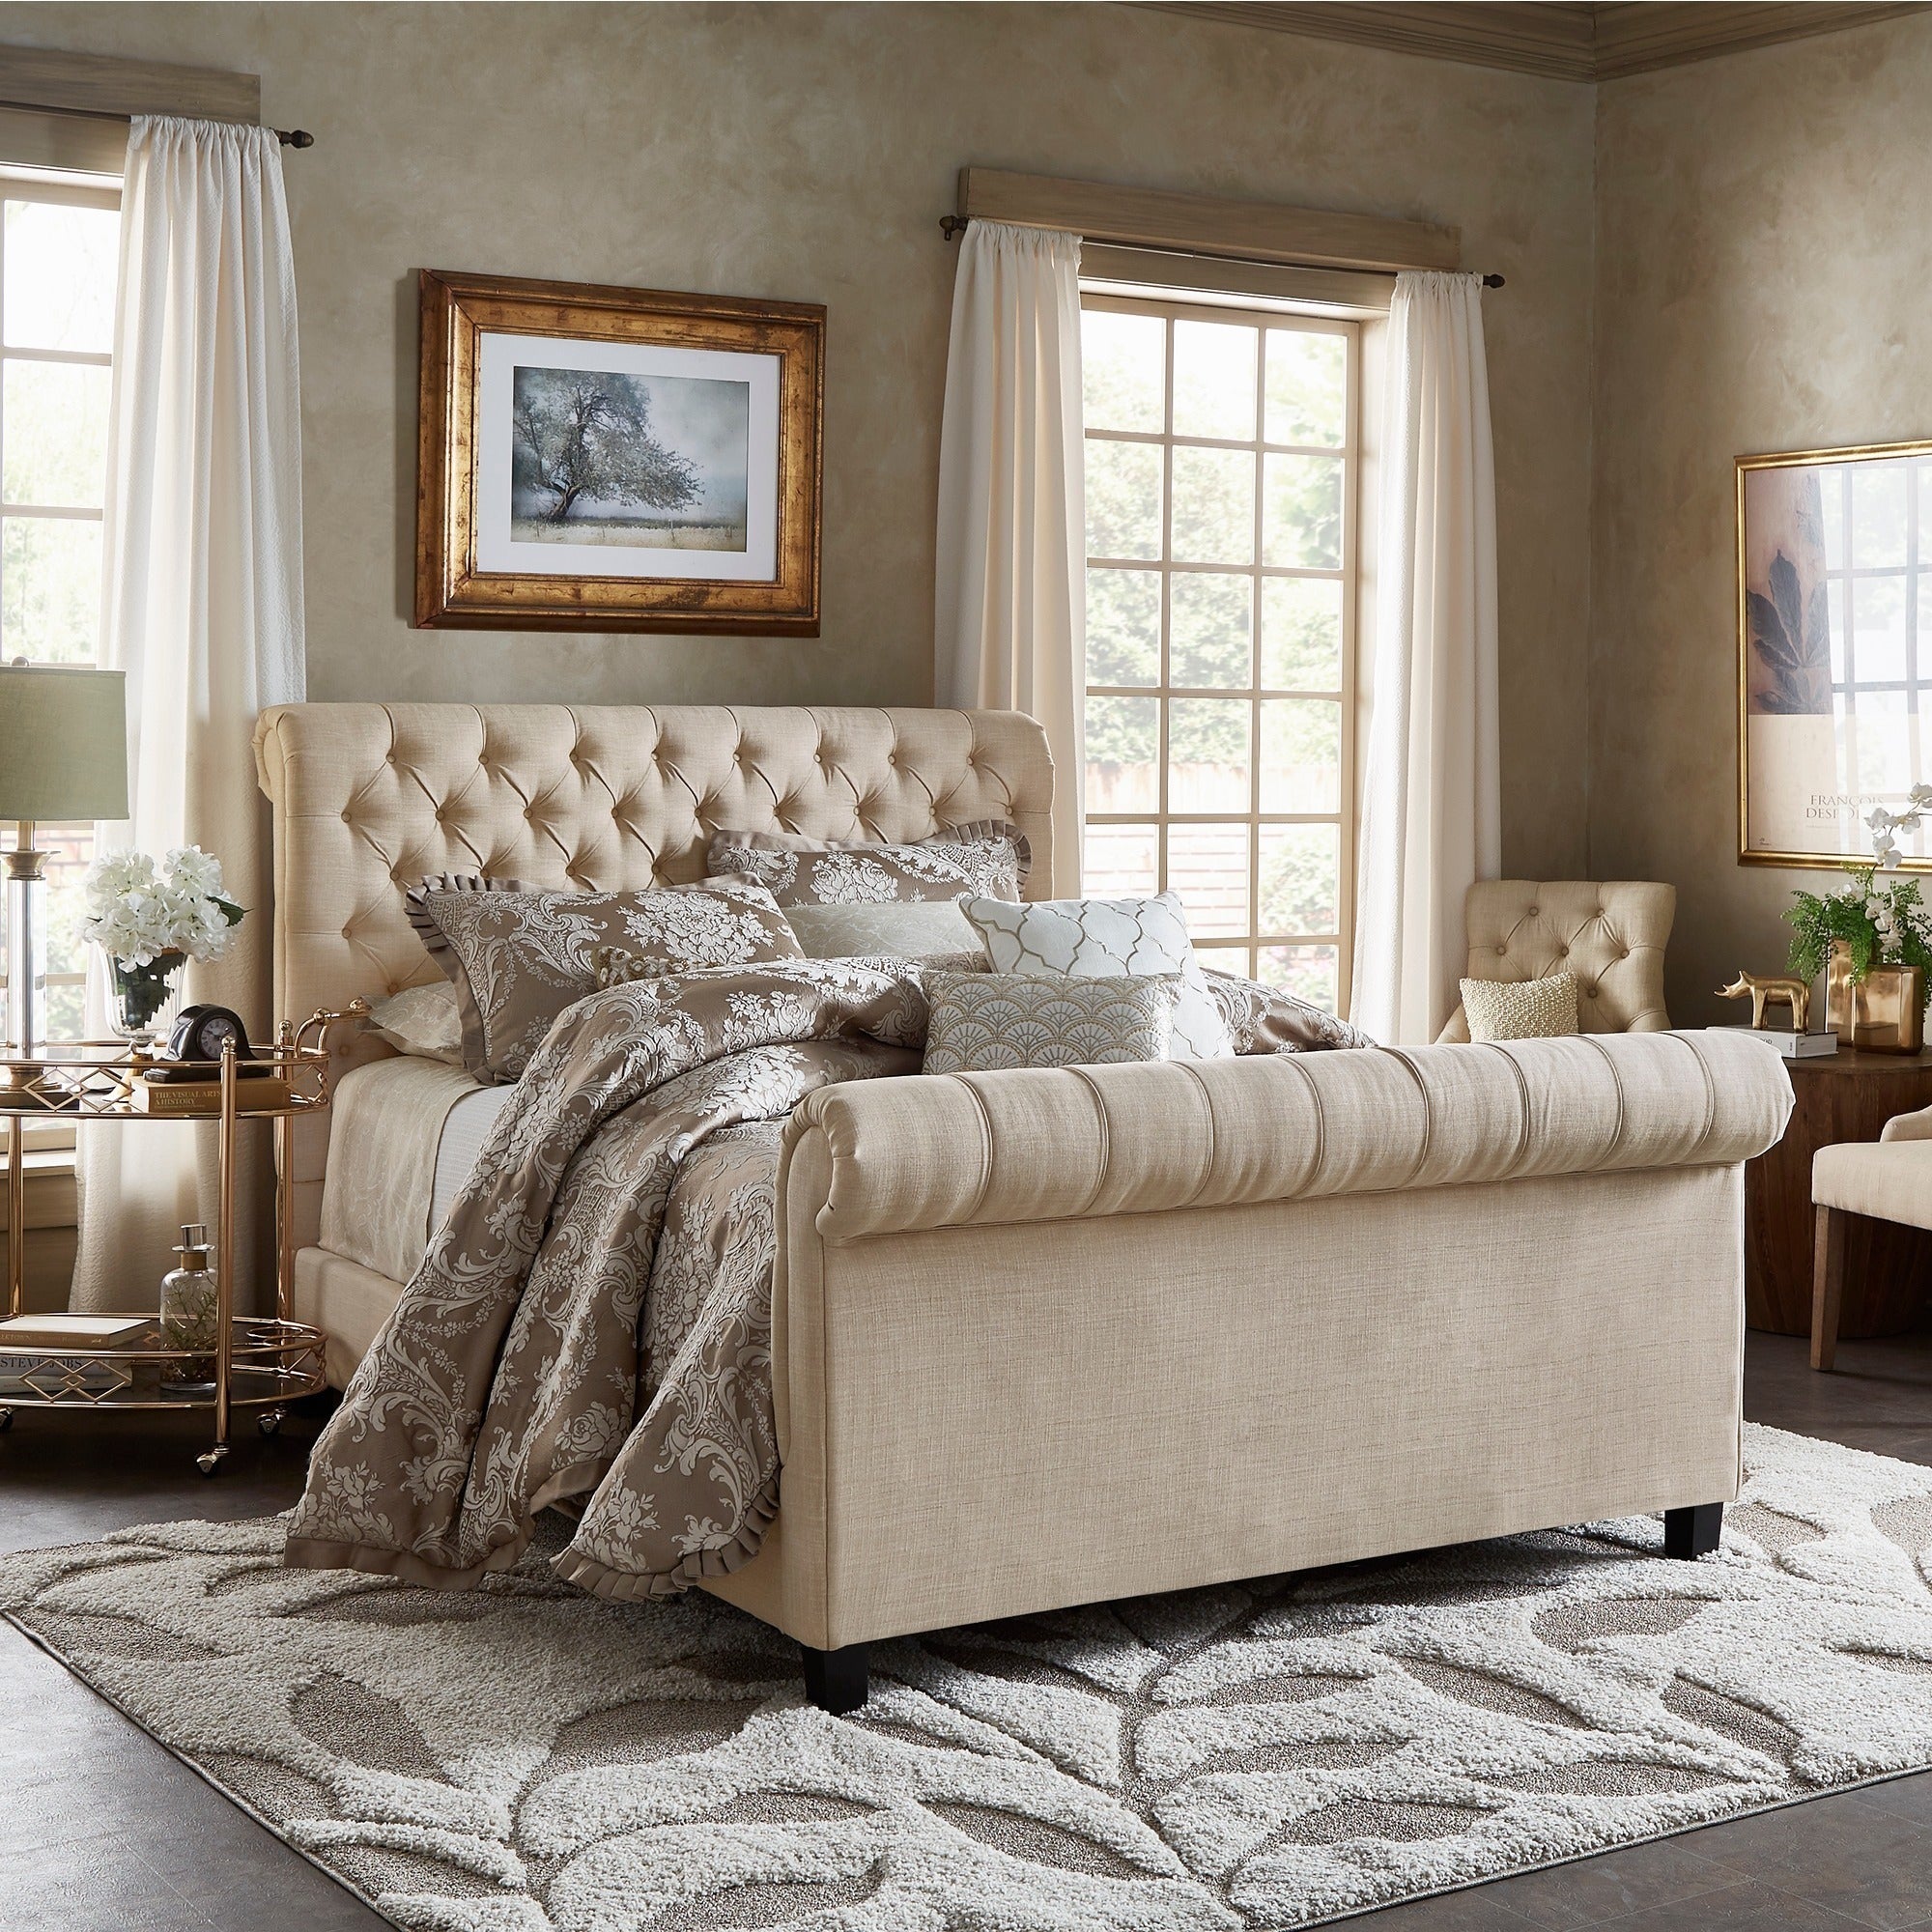 Reece Chesterfield Upholstered Sleigh, Fabric Sleigh Bed Frame King